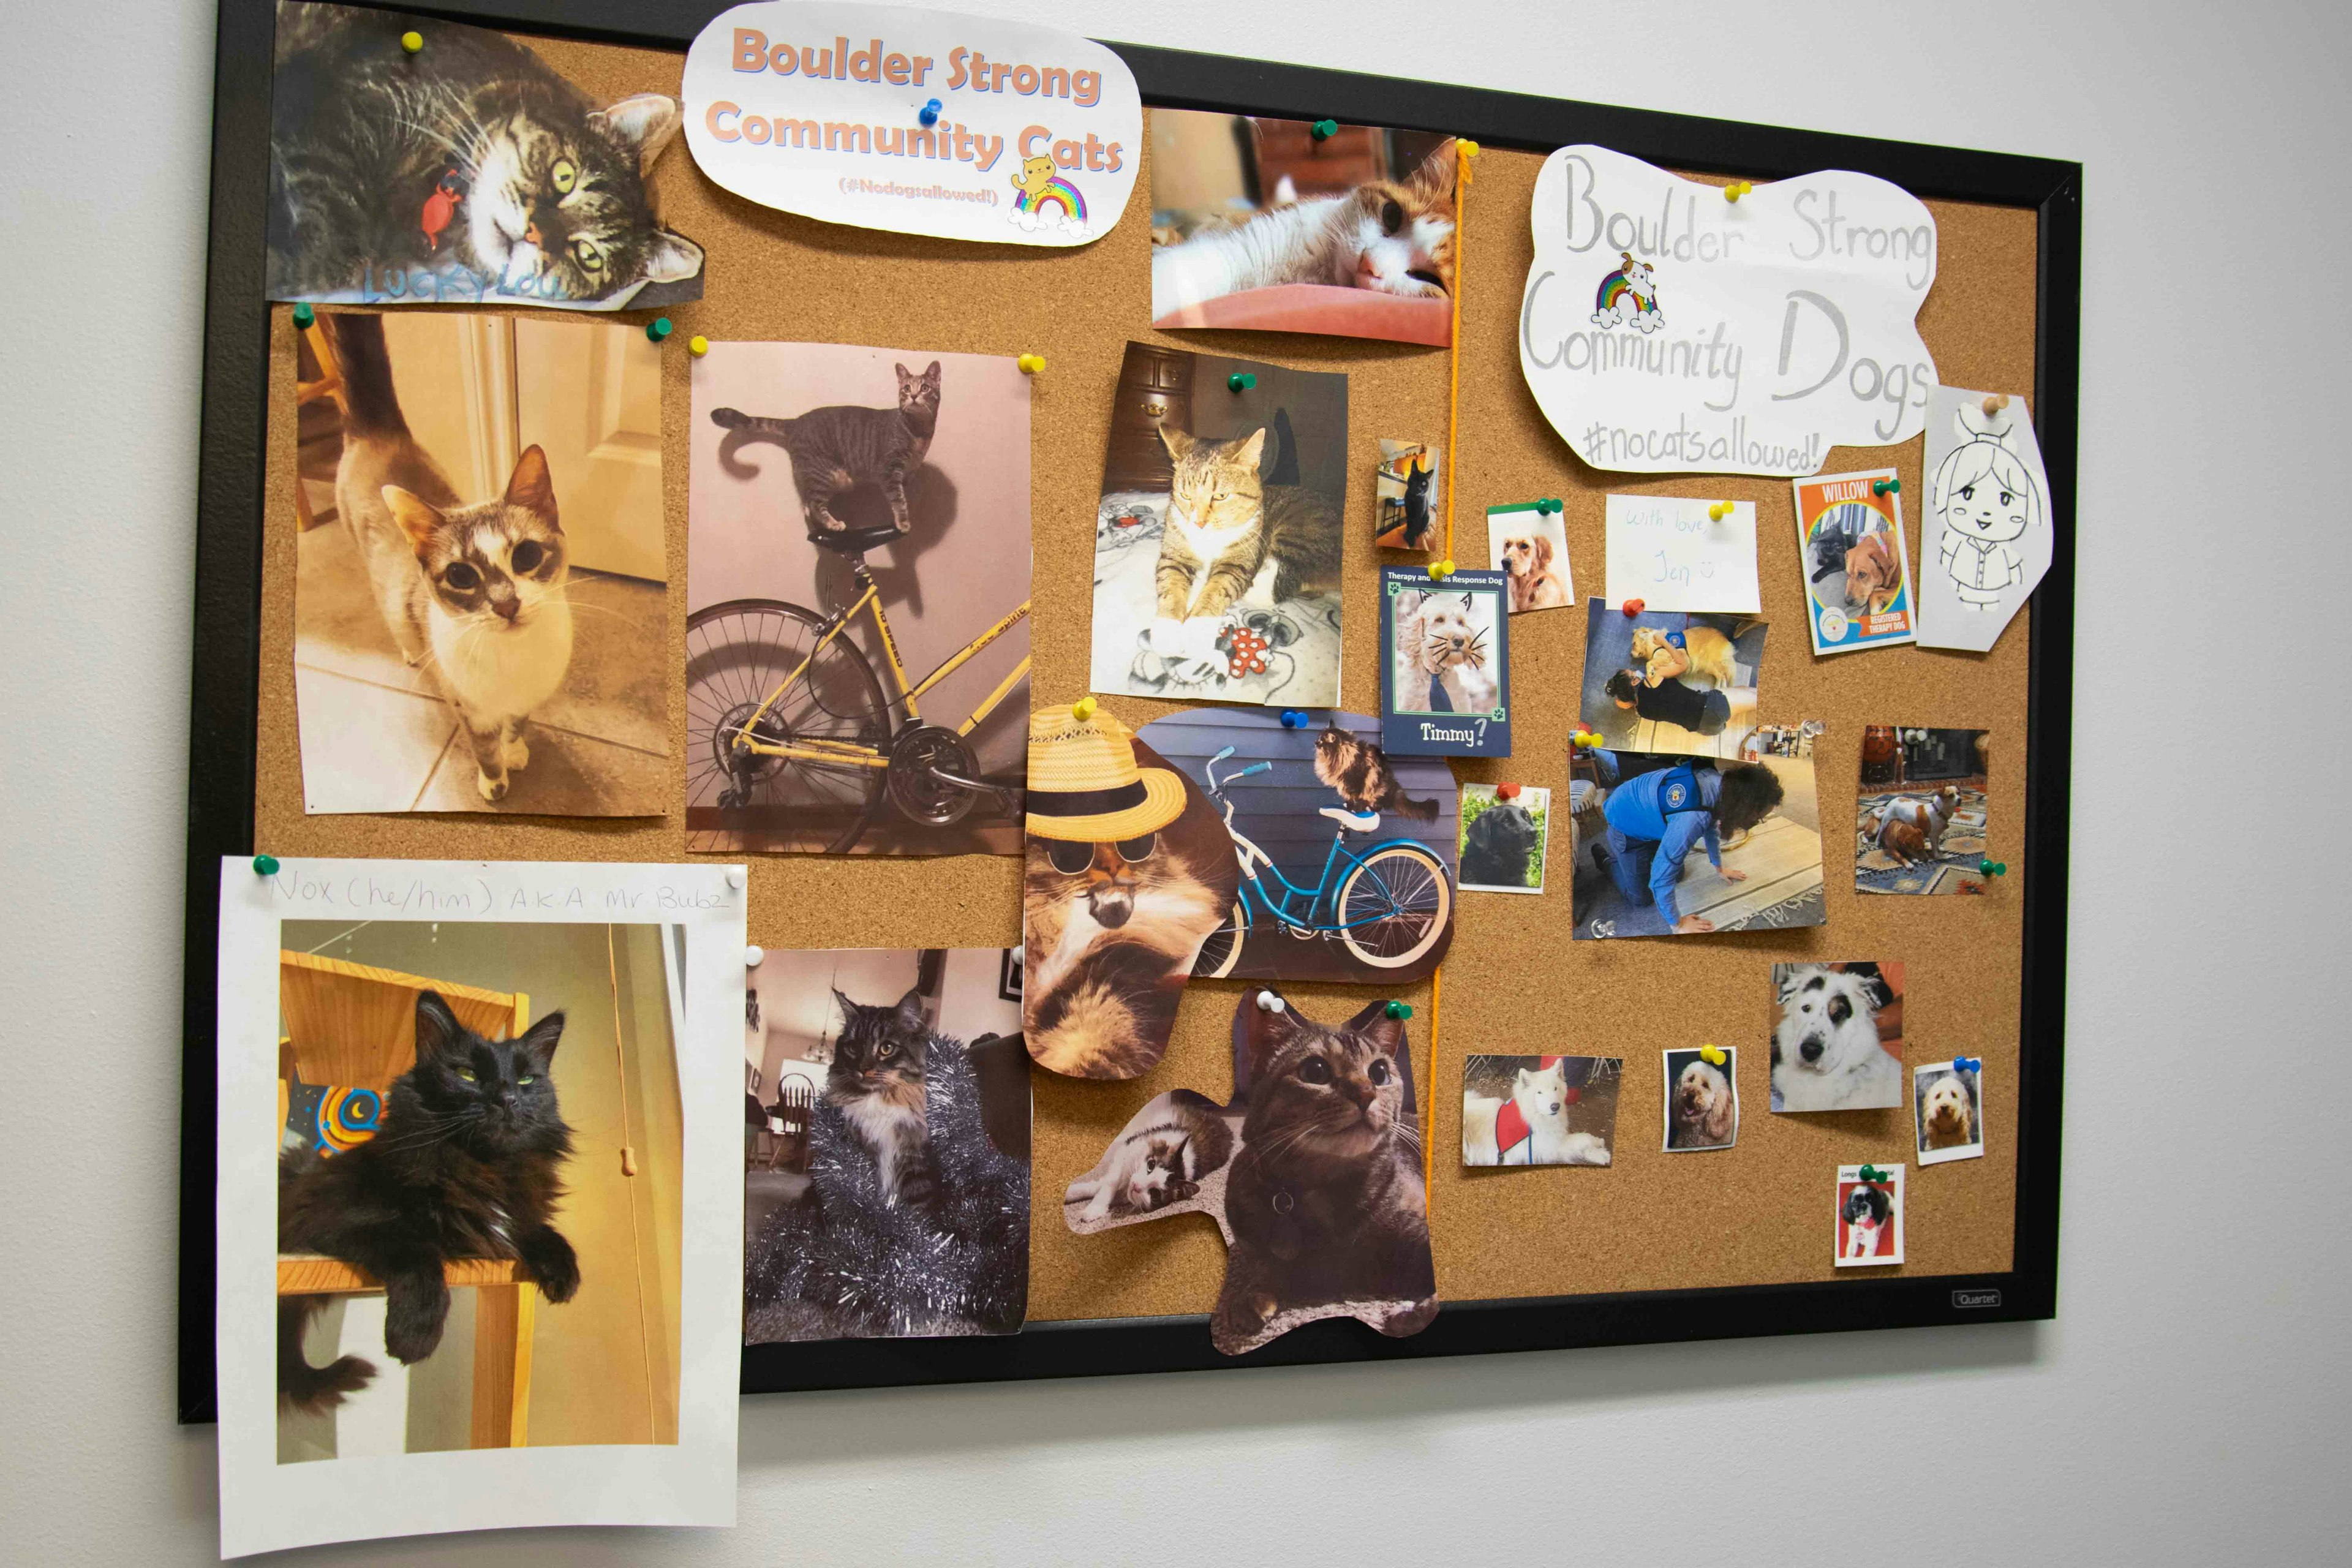 Bulletin board that features cats and dogs. Paper that reads: Boulder Strong Community Cats and Boulder Strong Community Dogs.